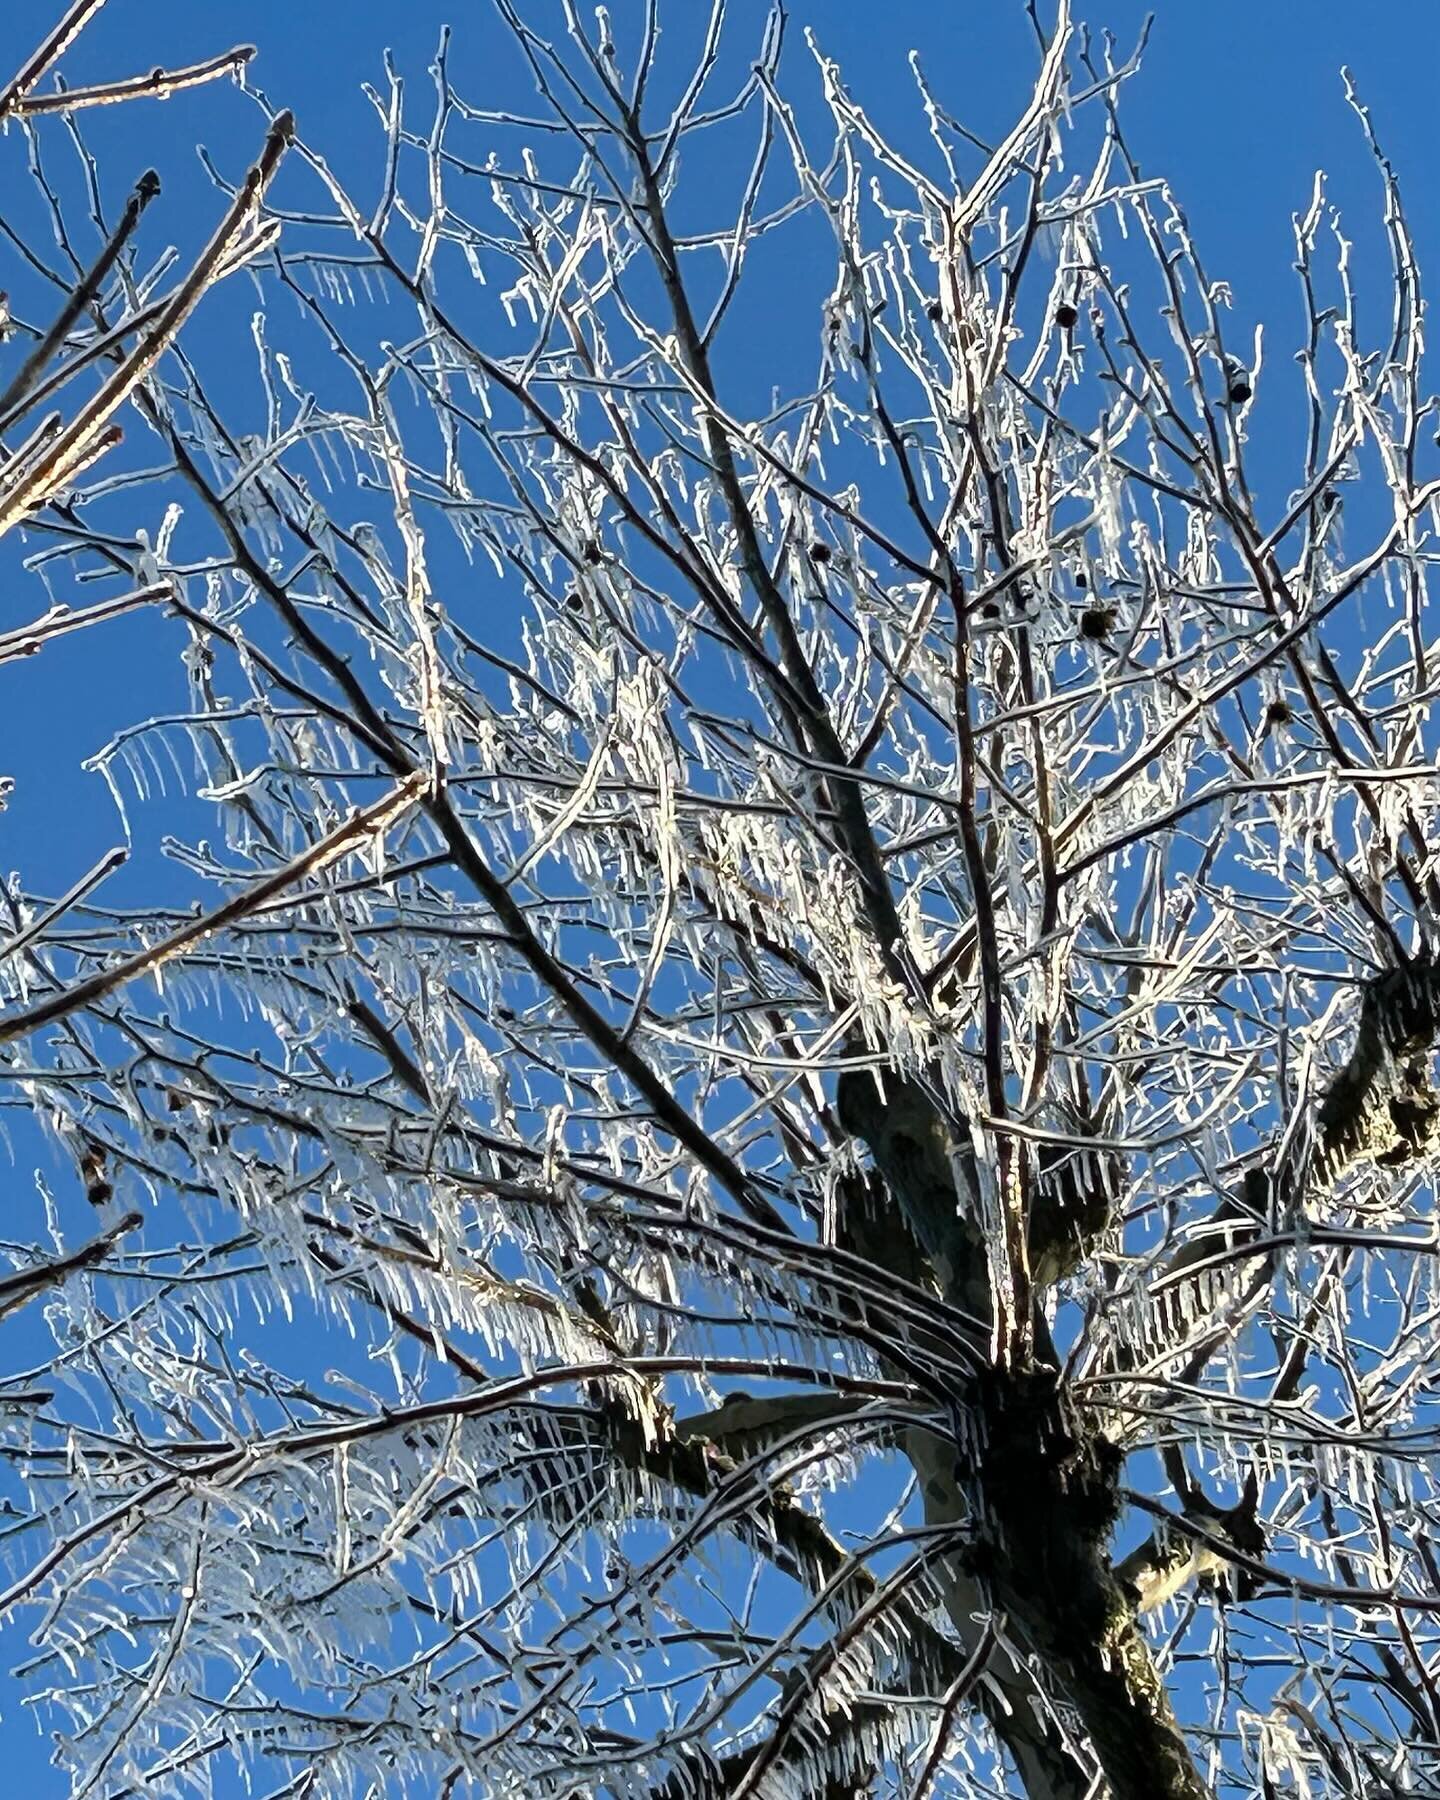 Glorious blue skies and an icicle tree! A burst water pipe, a very high fountain and a tall tree. #beautyinnature #palaceroad #sw2 #yogainsw2 #sw2 #yogaclassinlondon #streatham #tulsehill #westnorwood #icicles #icicletrees